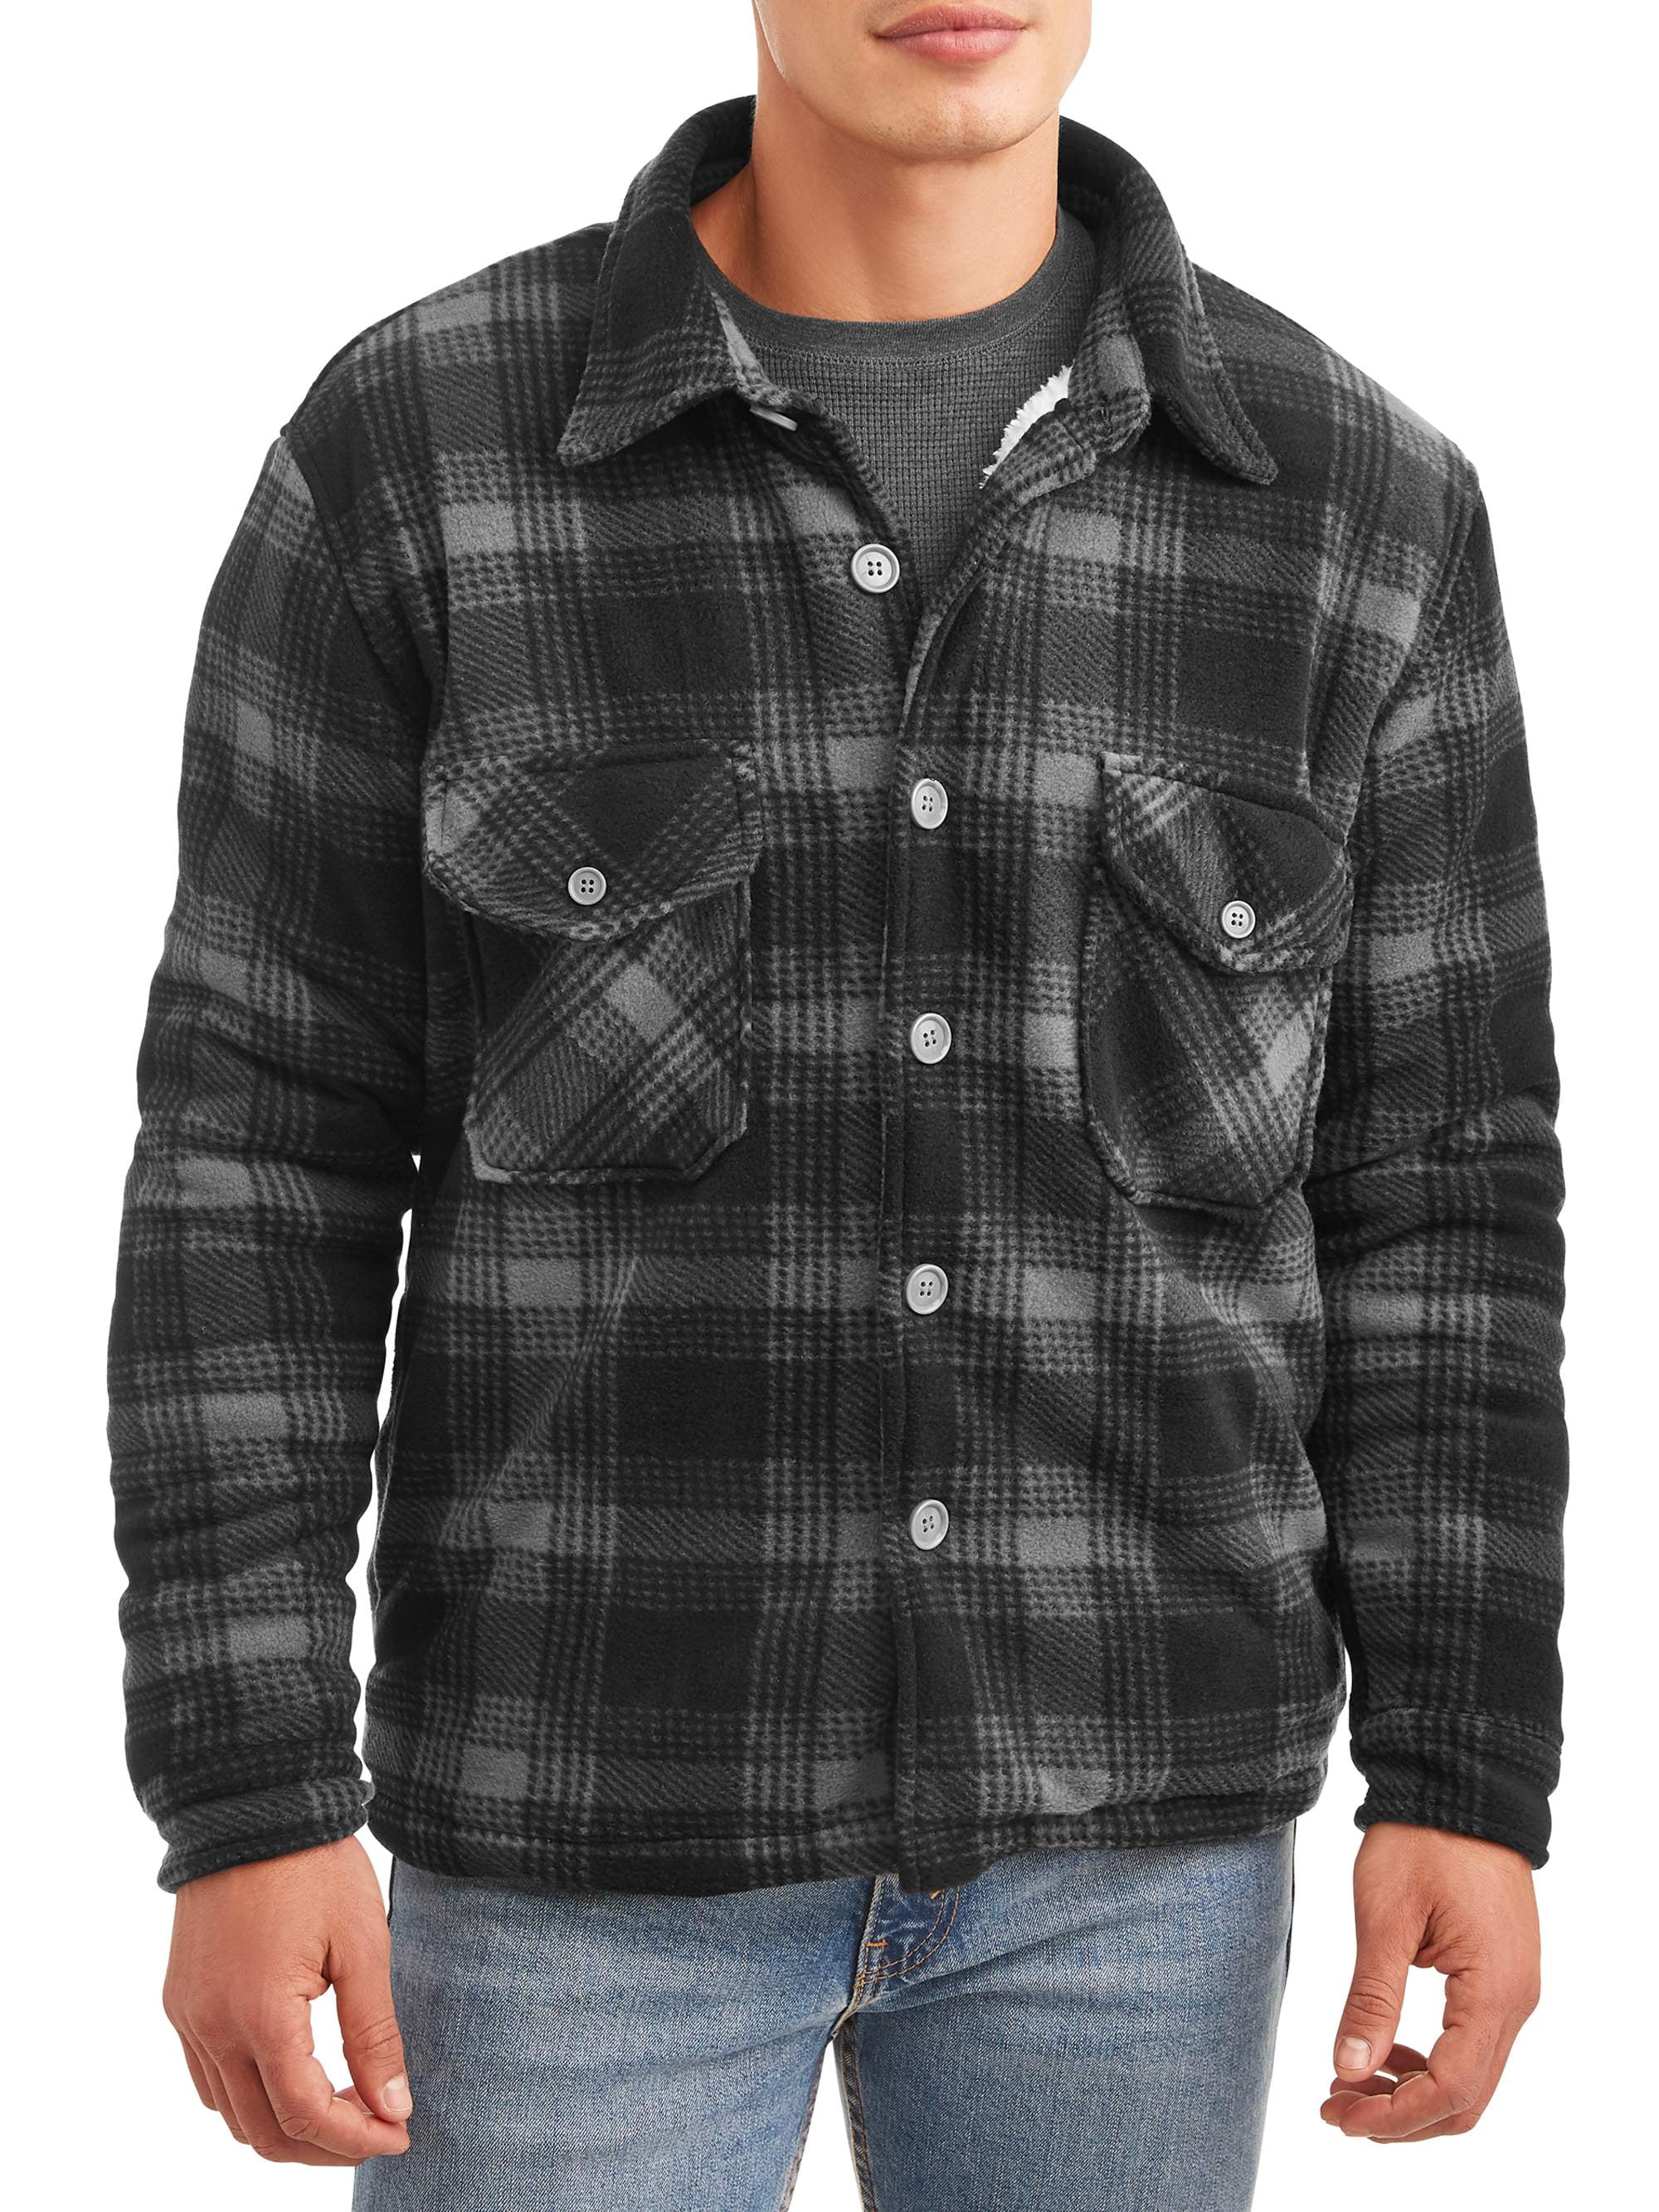 Climate Concepts Men's Plaid Heavy Weight Shirt Jacket with Sherpa ...